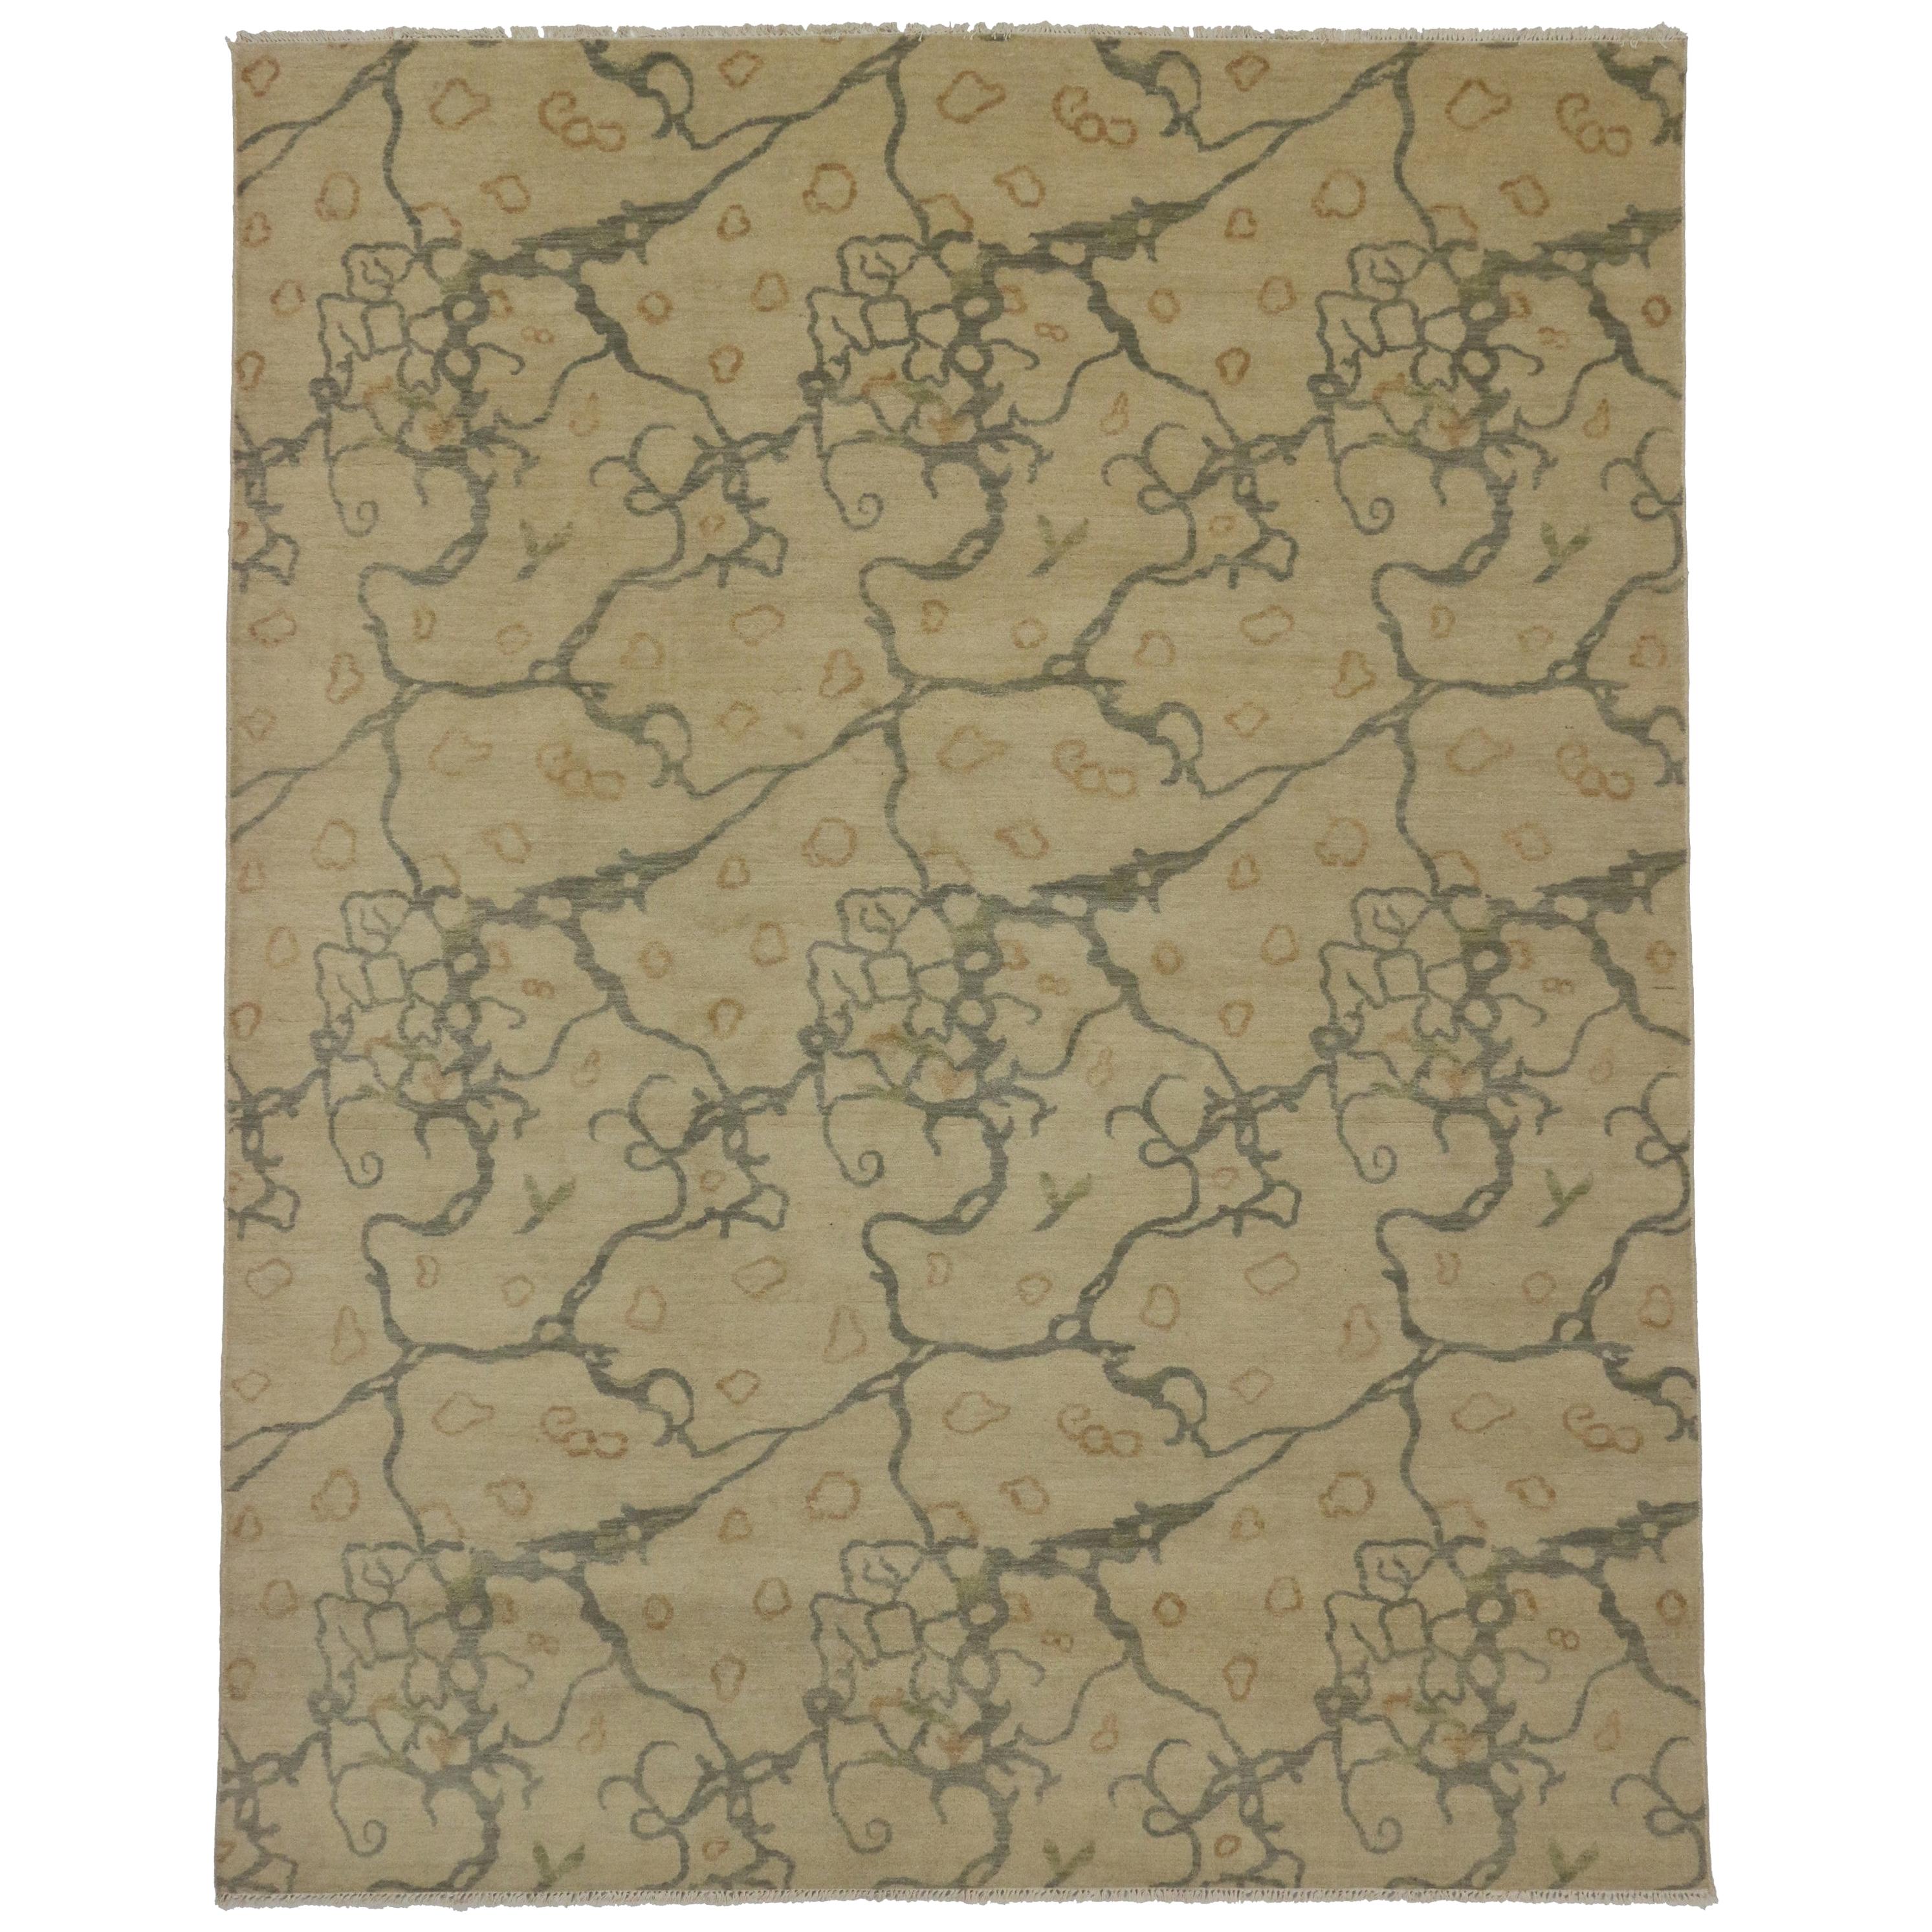 New Transitional Area Rug With Contemporary Abstract Style and Biophilic Design